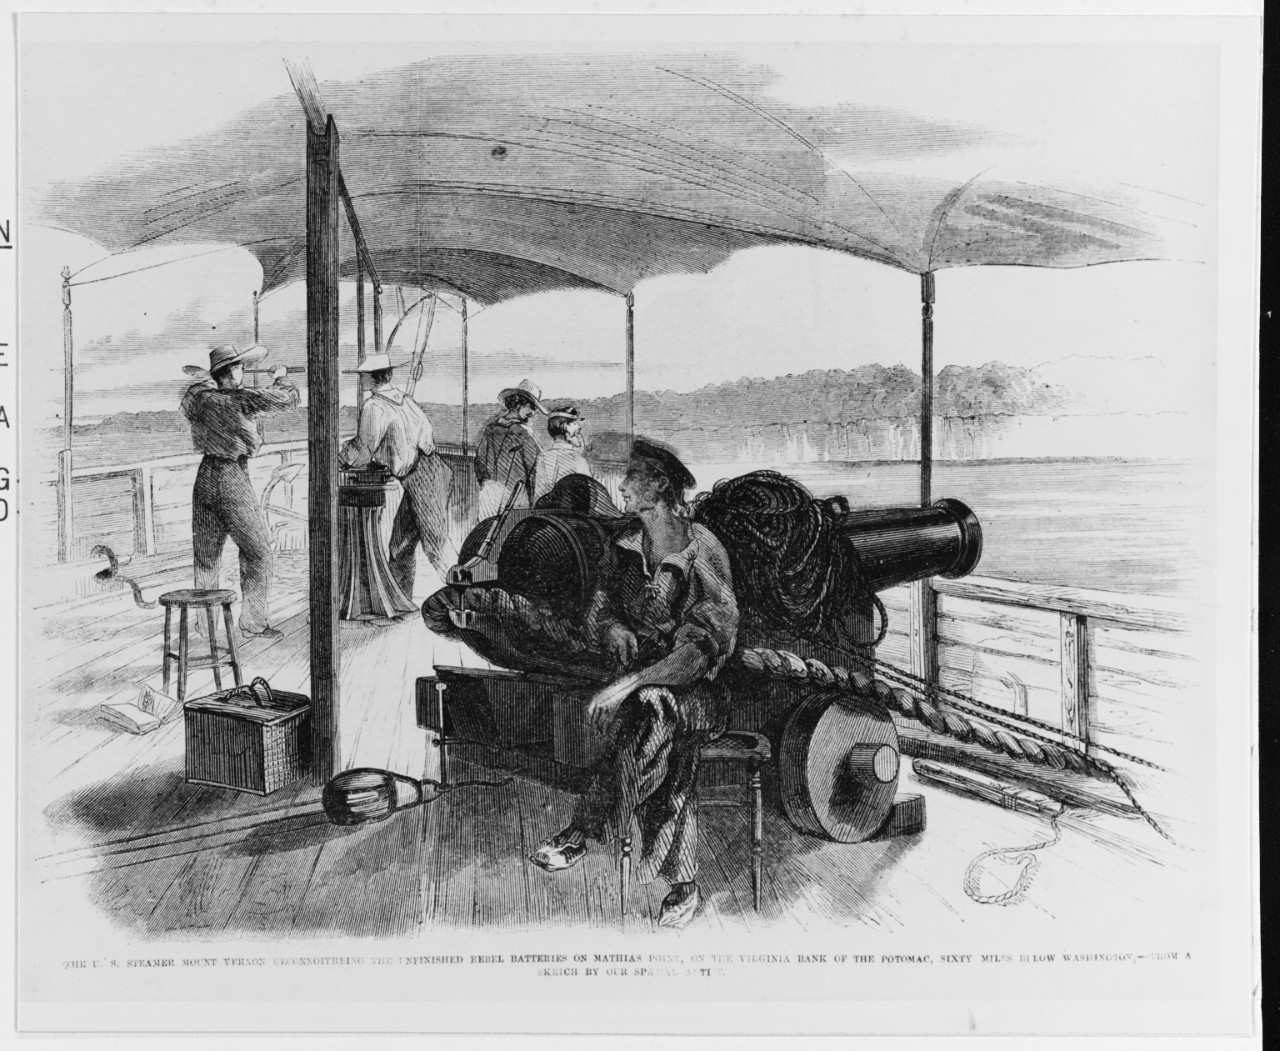 Photo #: NH 45740  &quot;The U.S. Steamer Mount Vernon Reconnoitreing the Unfinished Rebel Batteries on Mathias Point, on the Virginia Bank of the Potomac, Sixty Miles below Washington.&quot;